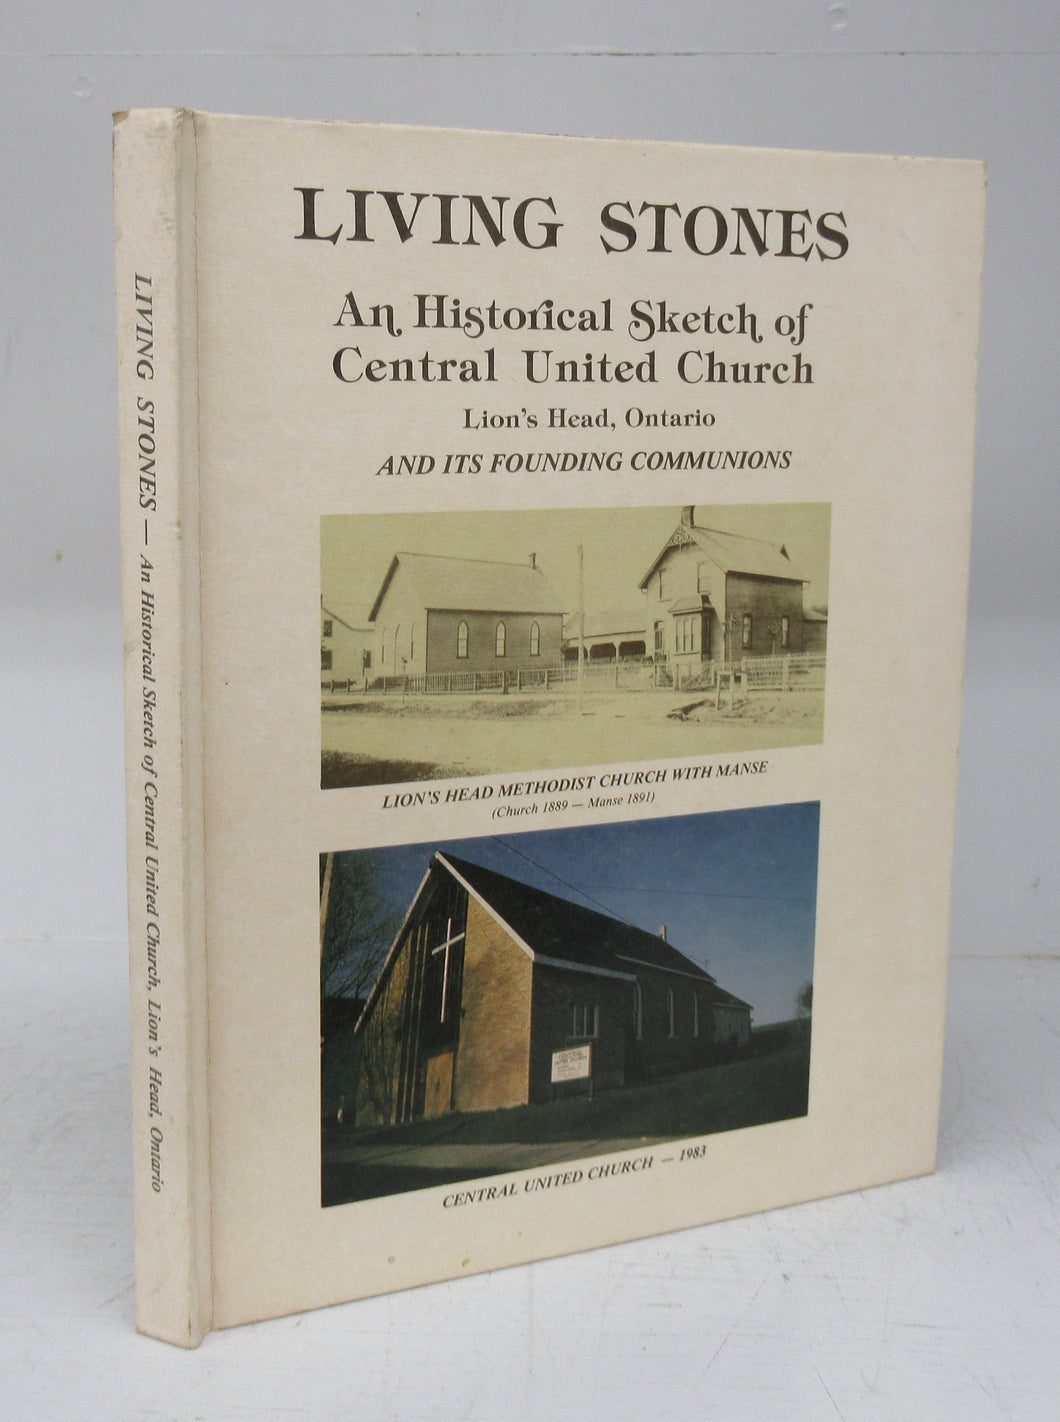 Living Stones: An Historical Sketch of Central United Church, Lion's Head, Ontario and its Founding Communions